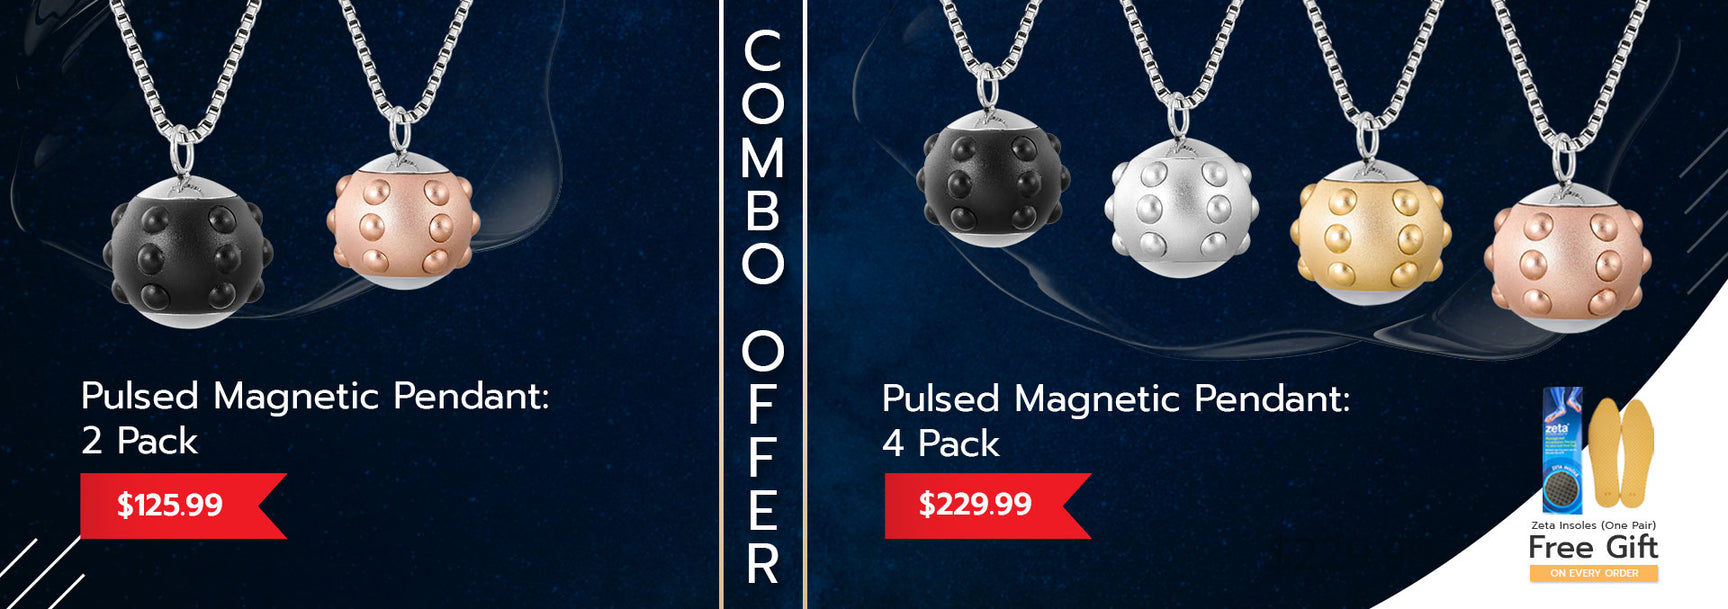 Pulsed Magnetic Pendant Combo Offer